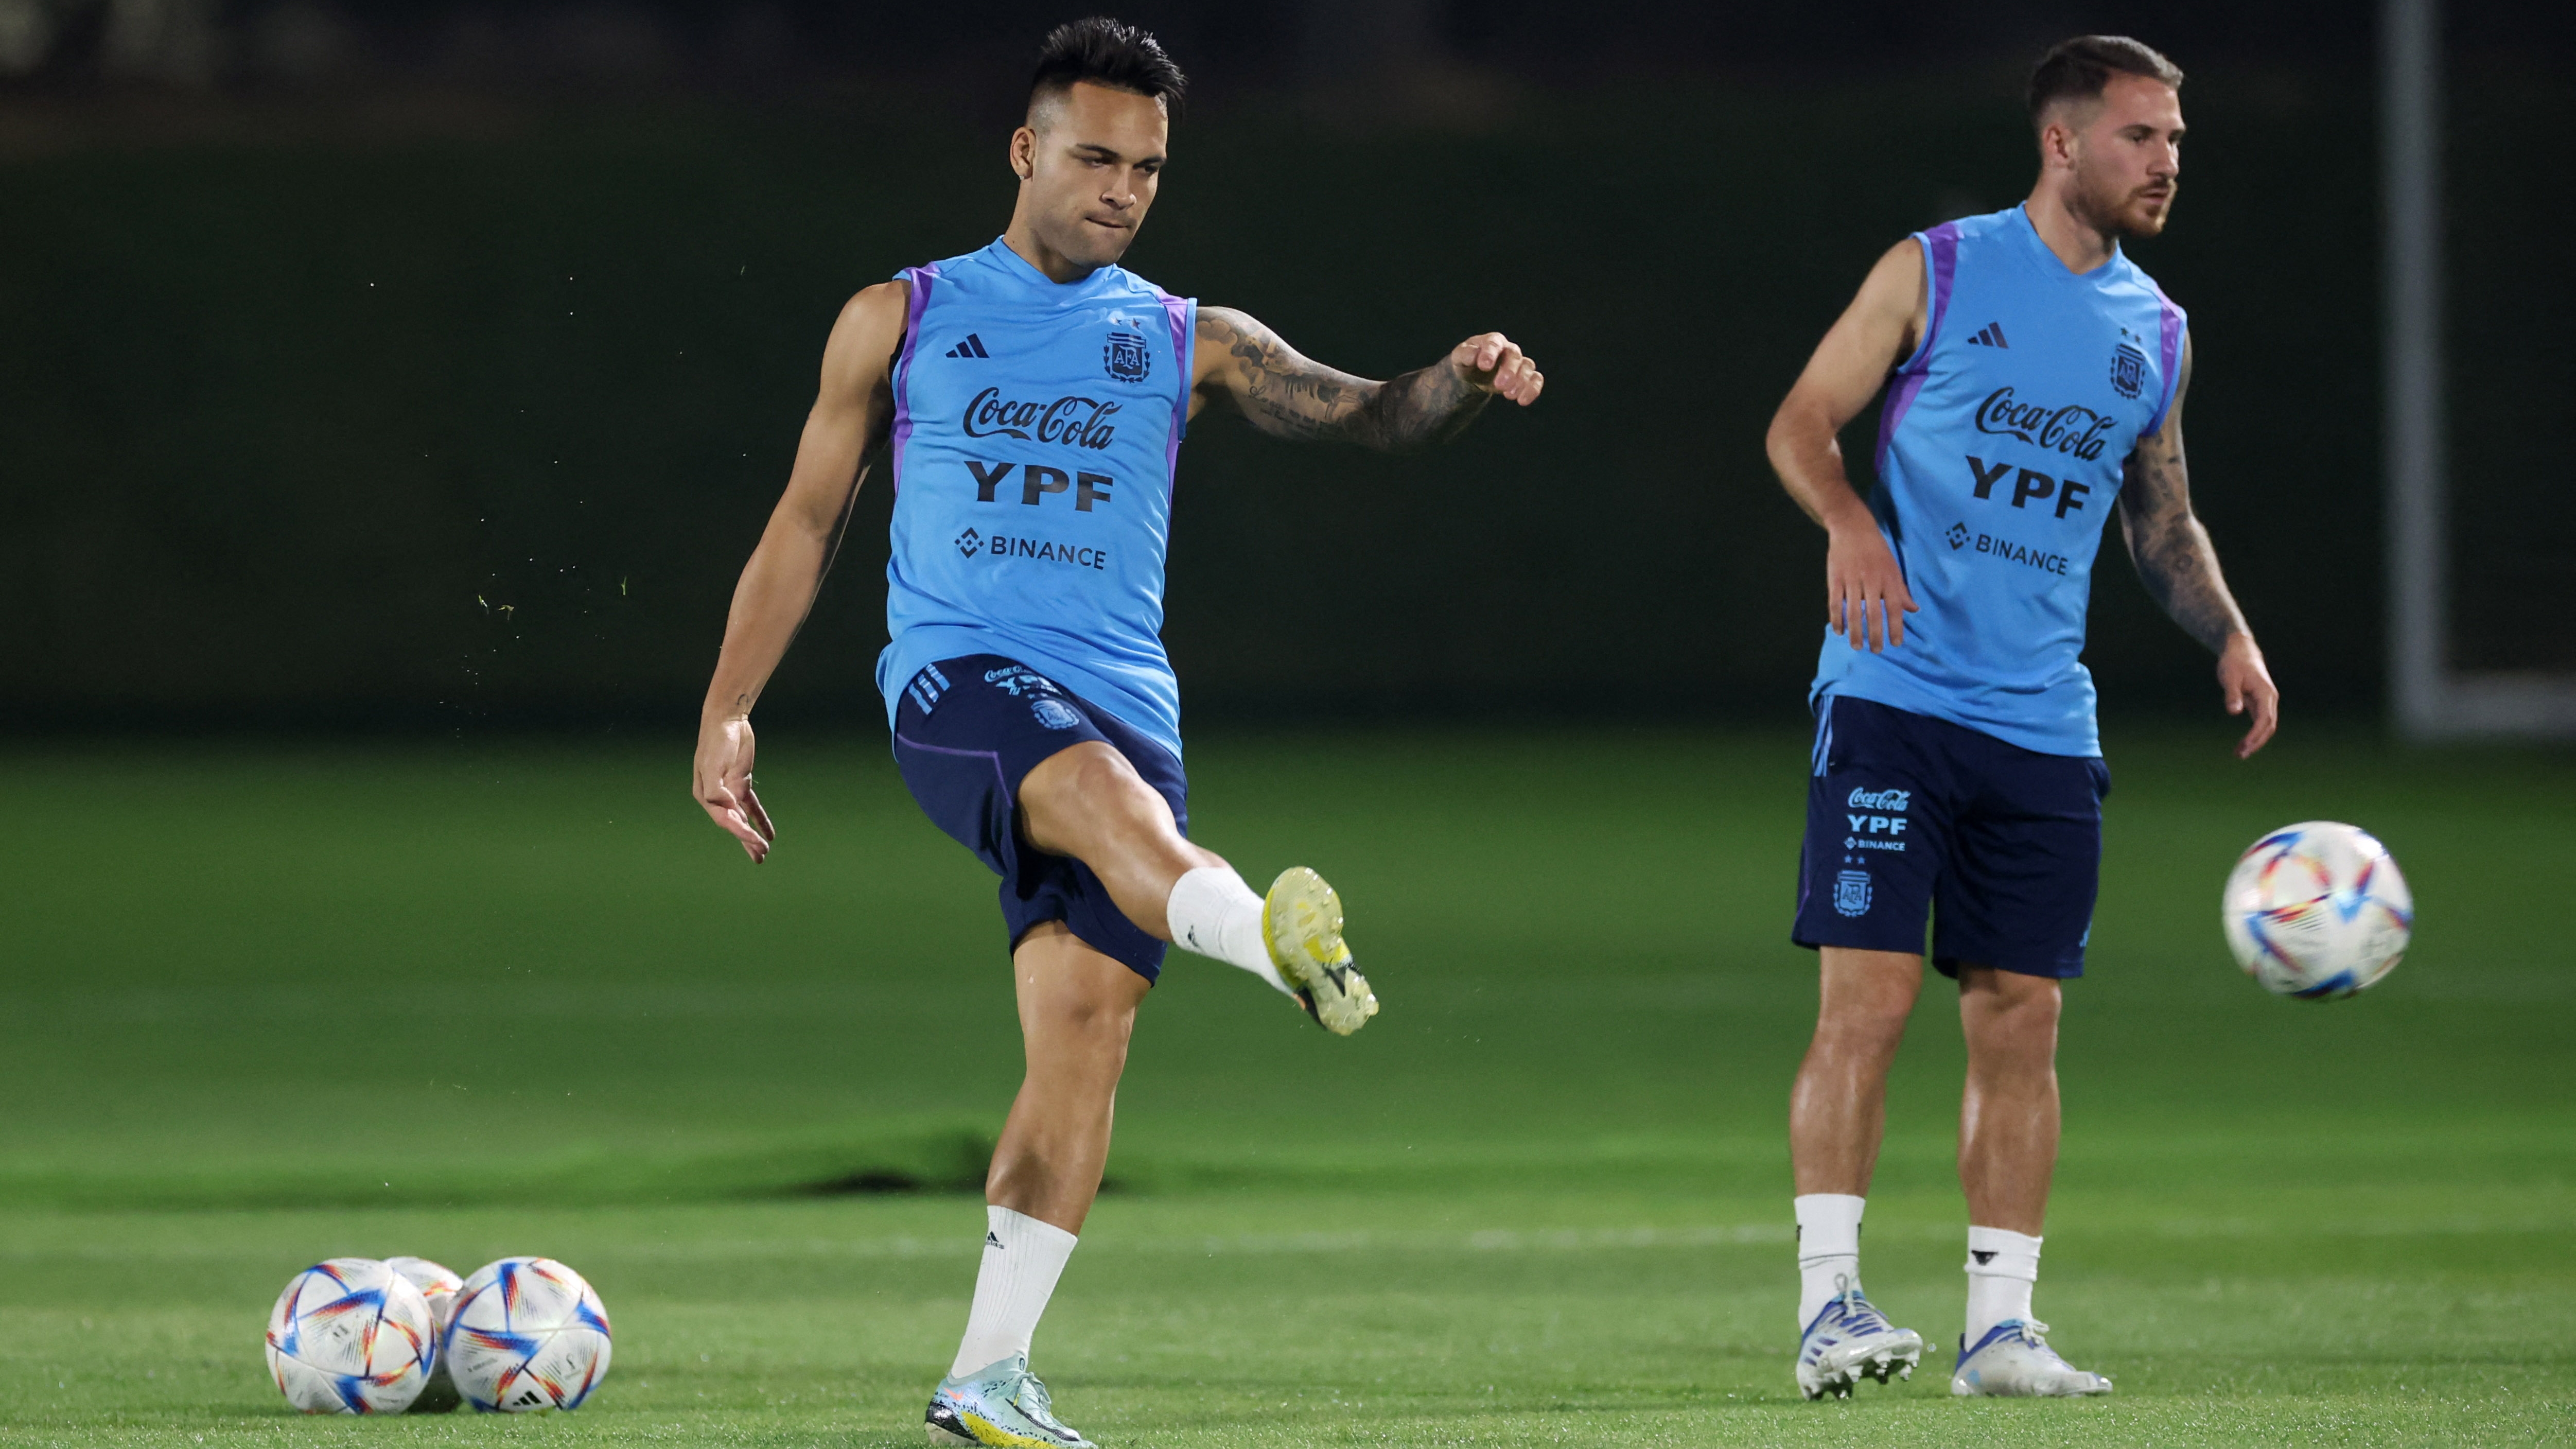 Lautaro Martínez practiced without problems and is expected to start on Tuesday, November 22, against Saudi Arabia in the debut of the World Cup (REUTERS / Carl Recine)